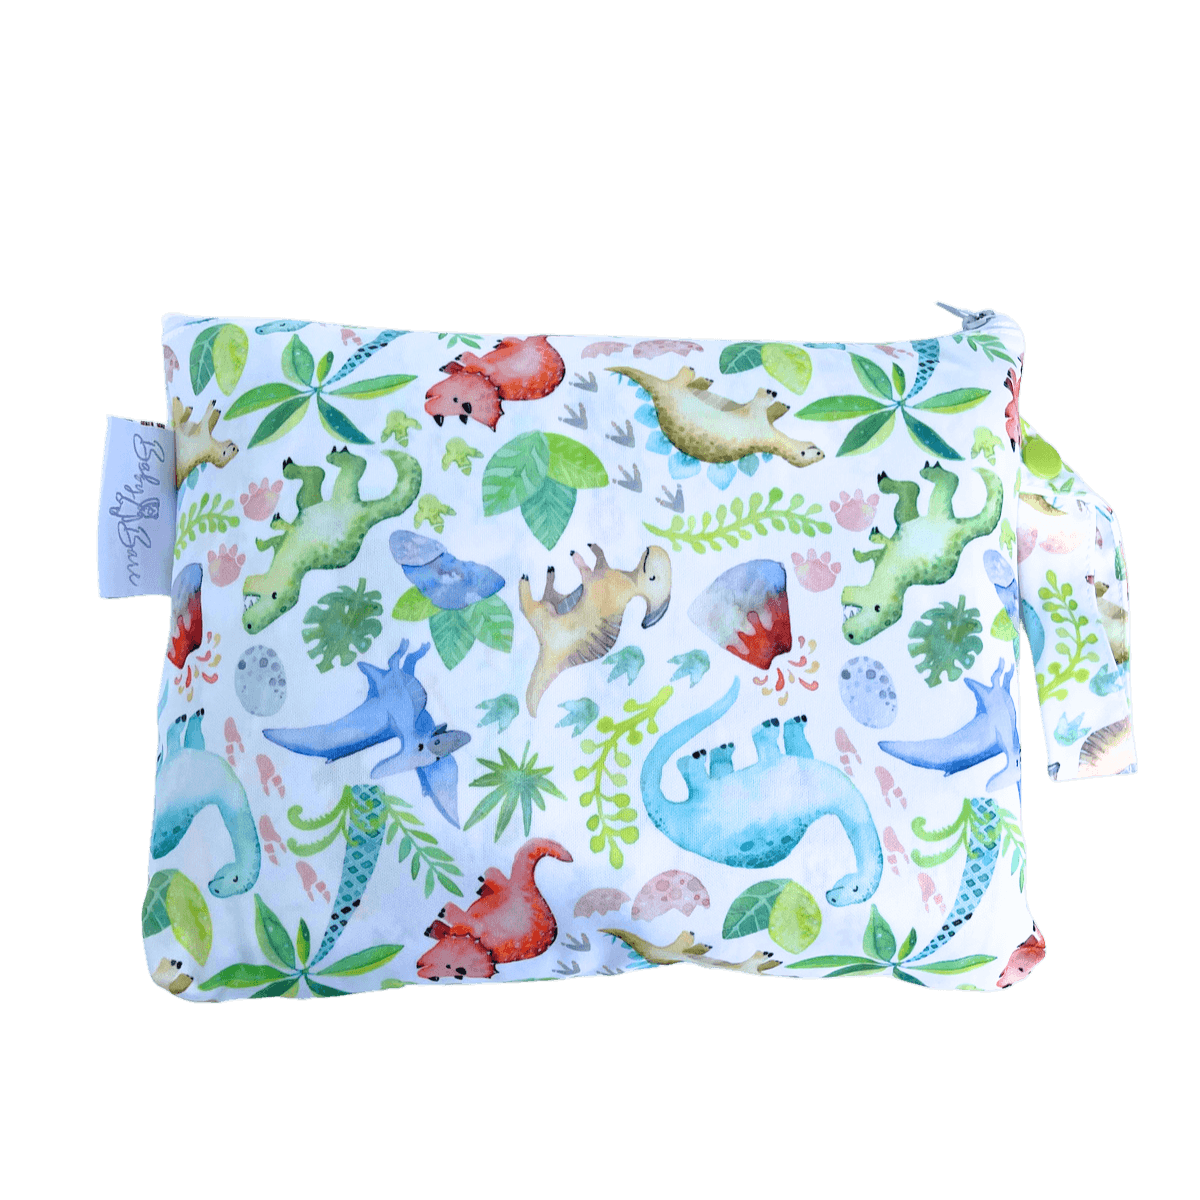 Load image into Gallery viewer, Wet Bag - Mini - Story Book - Baby Bare Cloth Nappies
